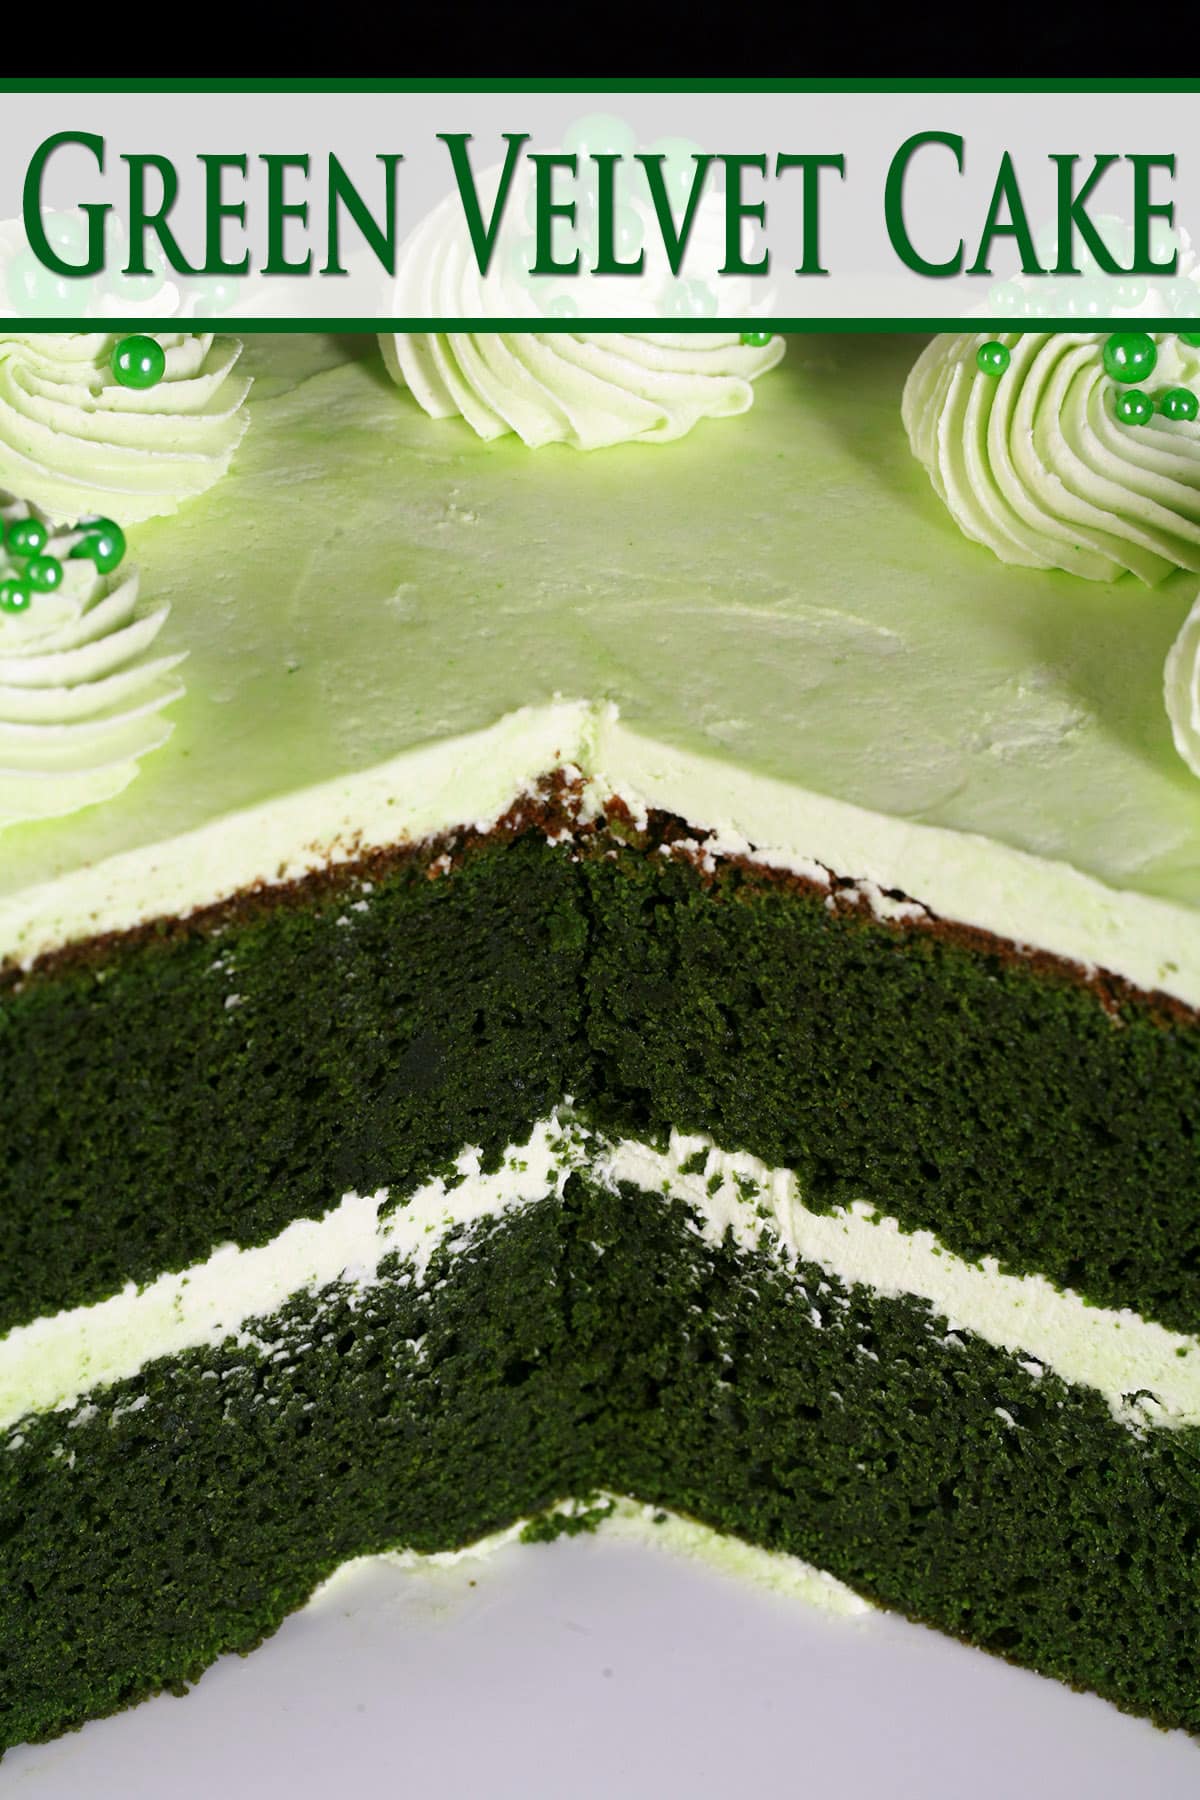 A green velvet cake cut  open to show two layers of dark green cake, with light green frosting in between and all around.